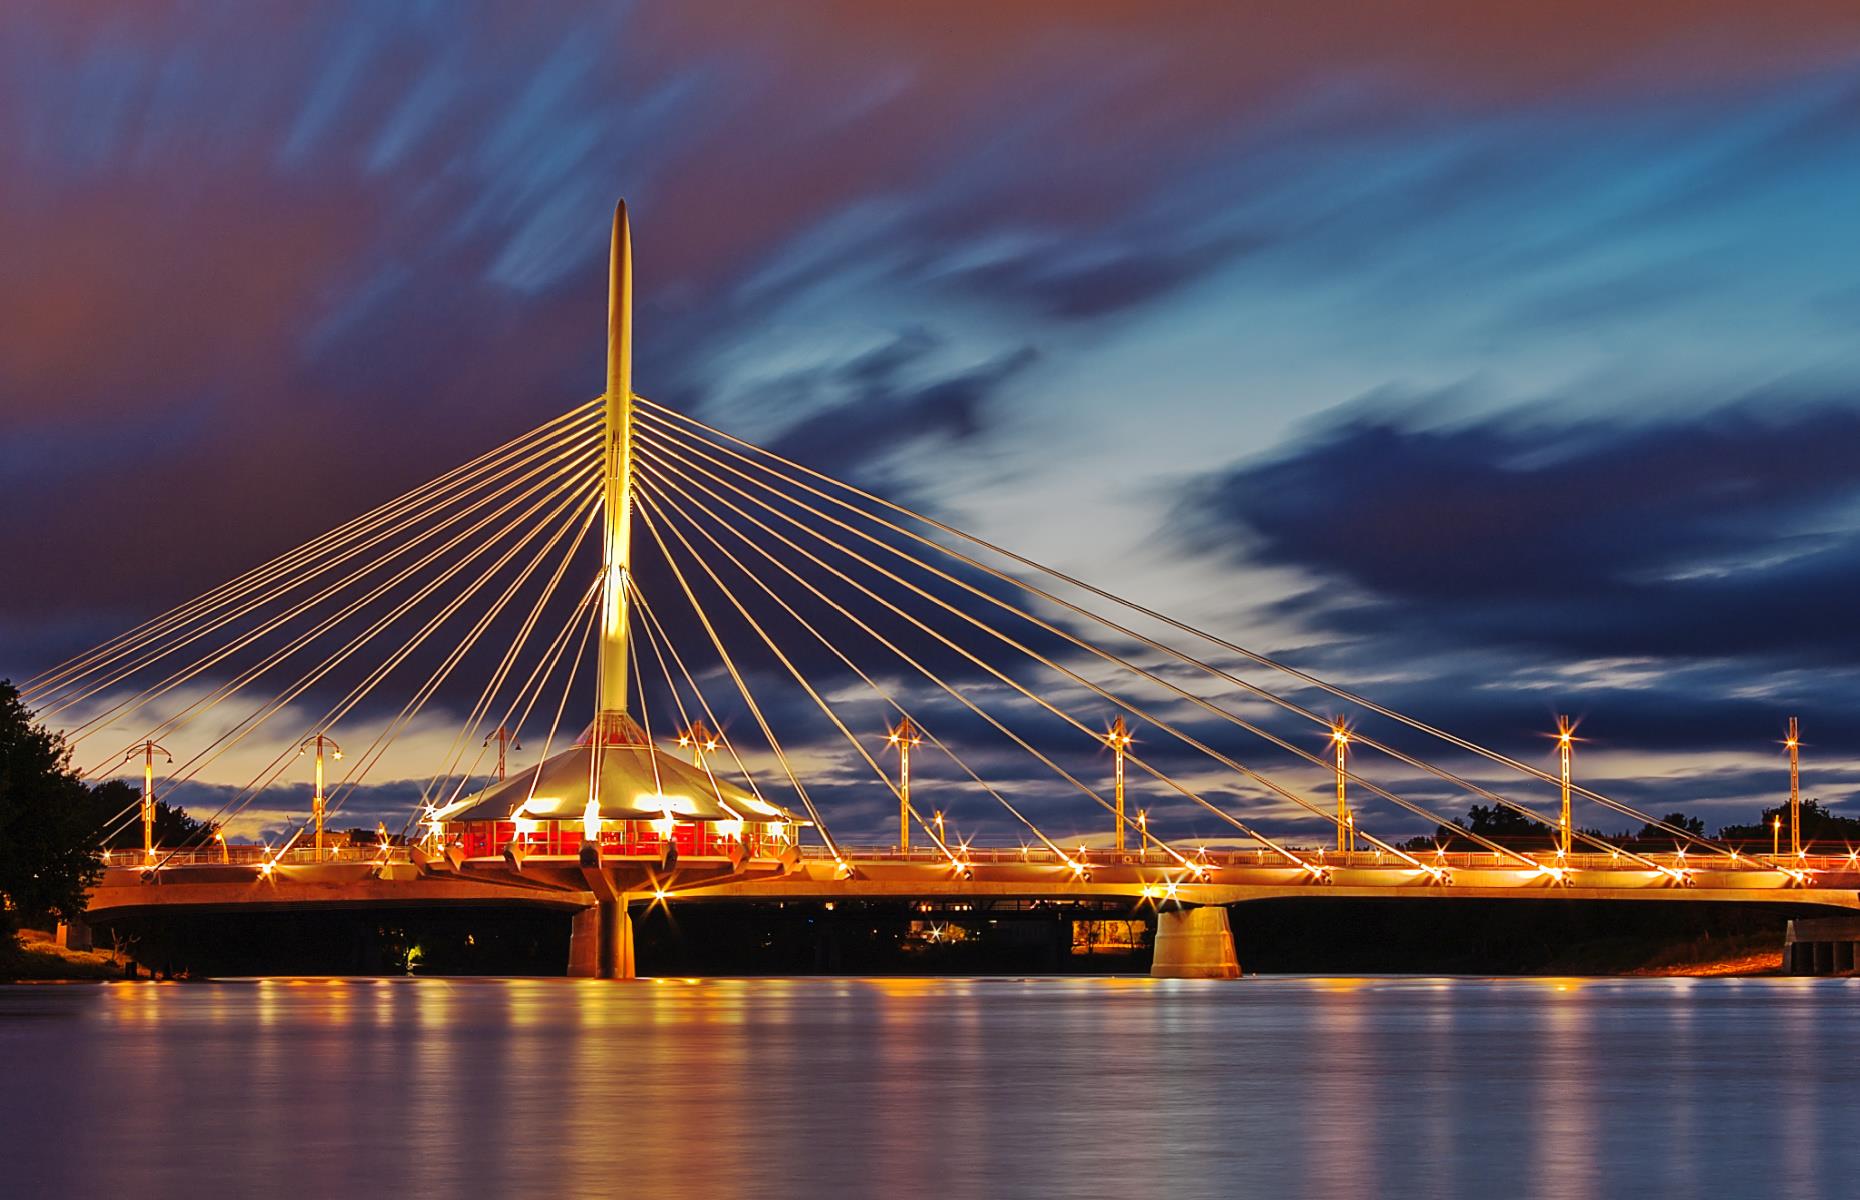 Take In the View From These Awe-Inspiring Bridges